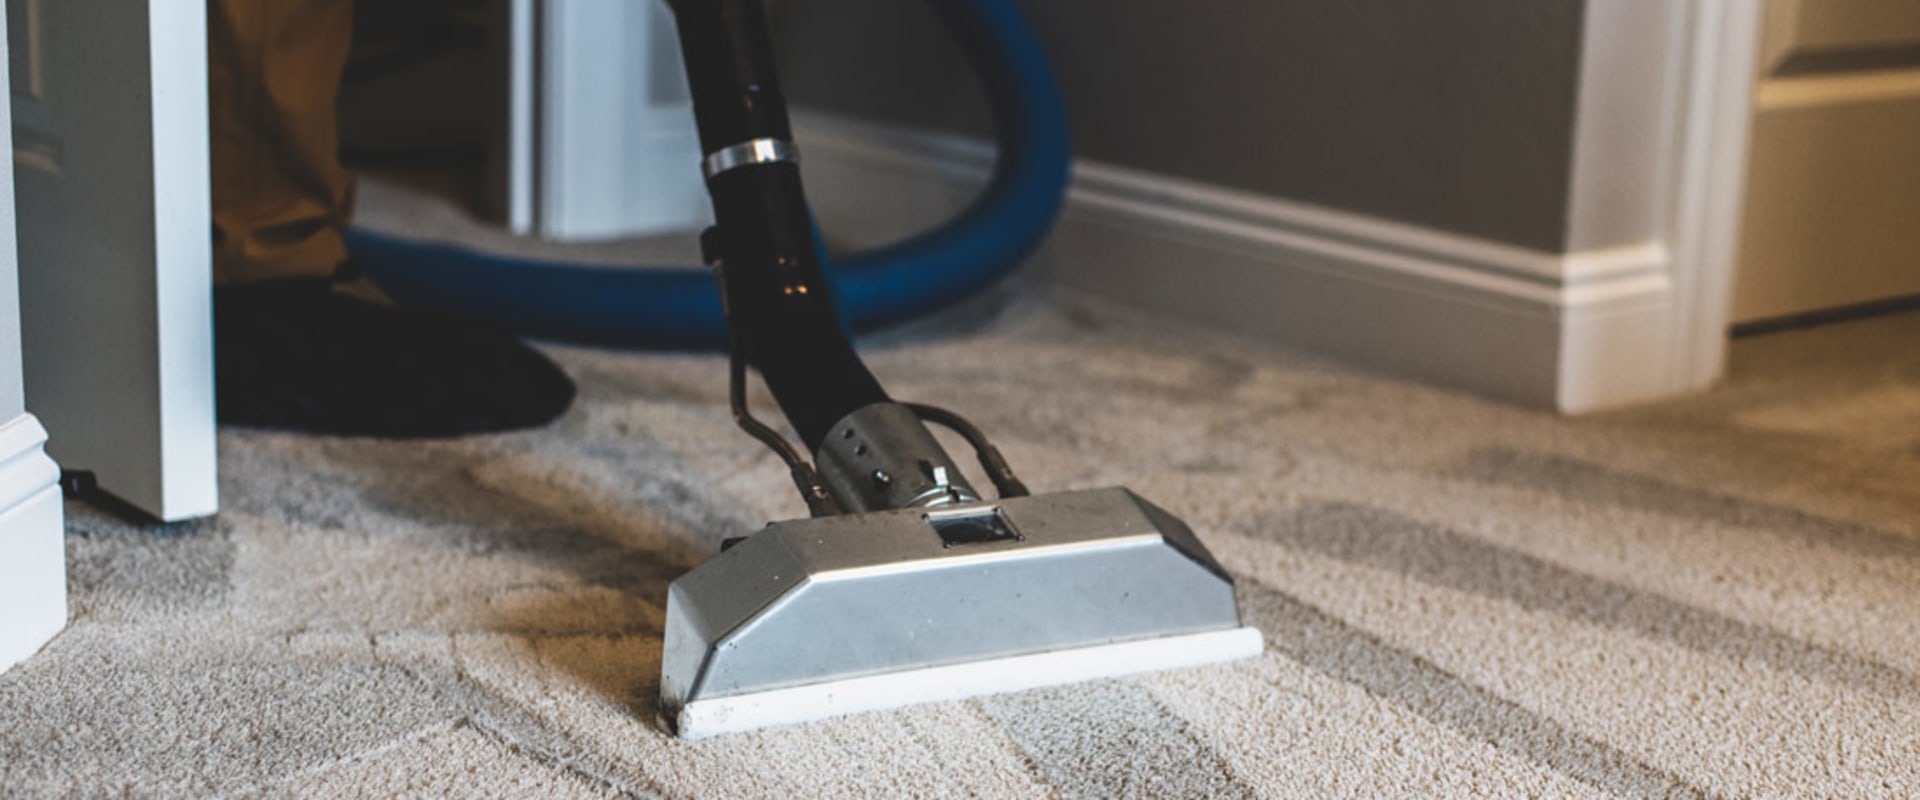 Does professional carpet cleaning get rid of pet urine?